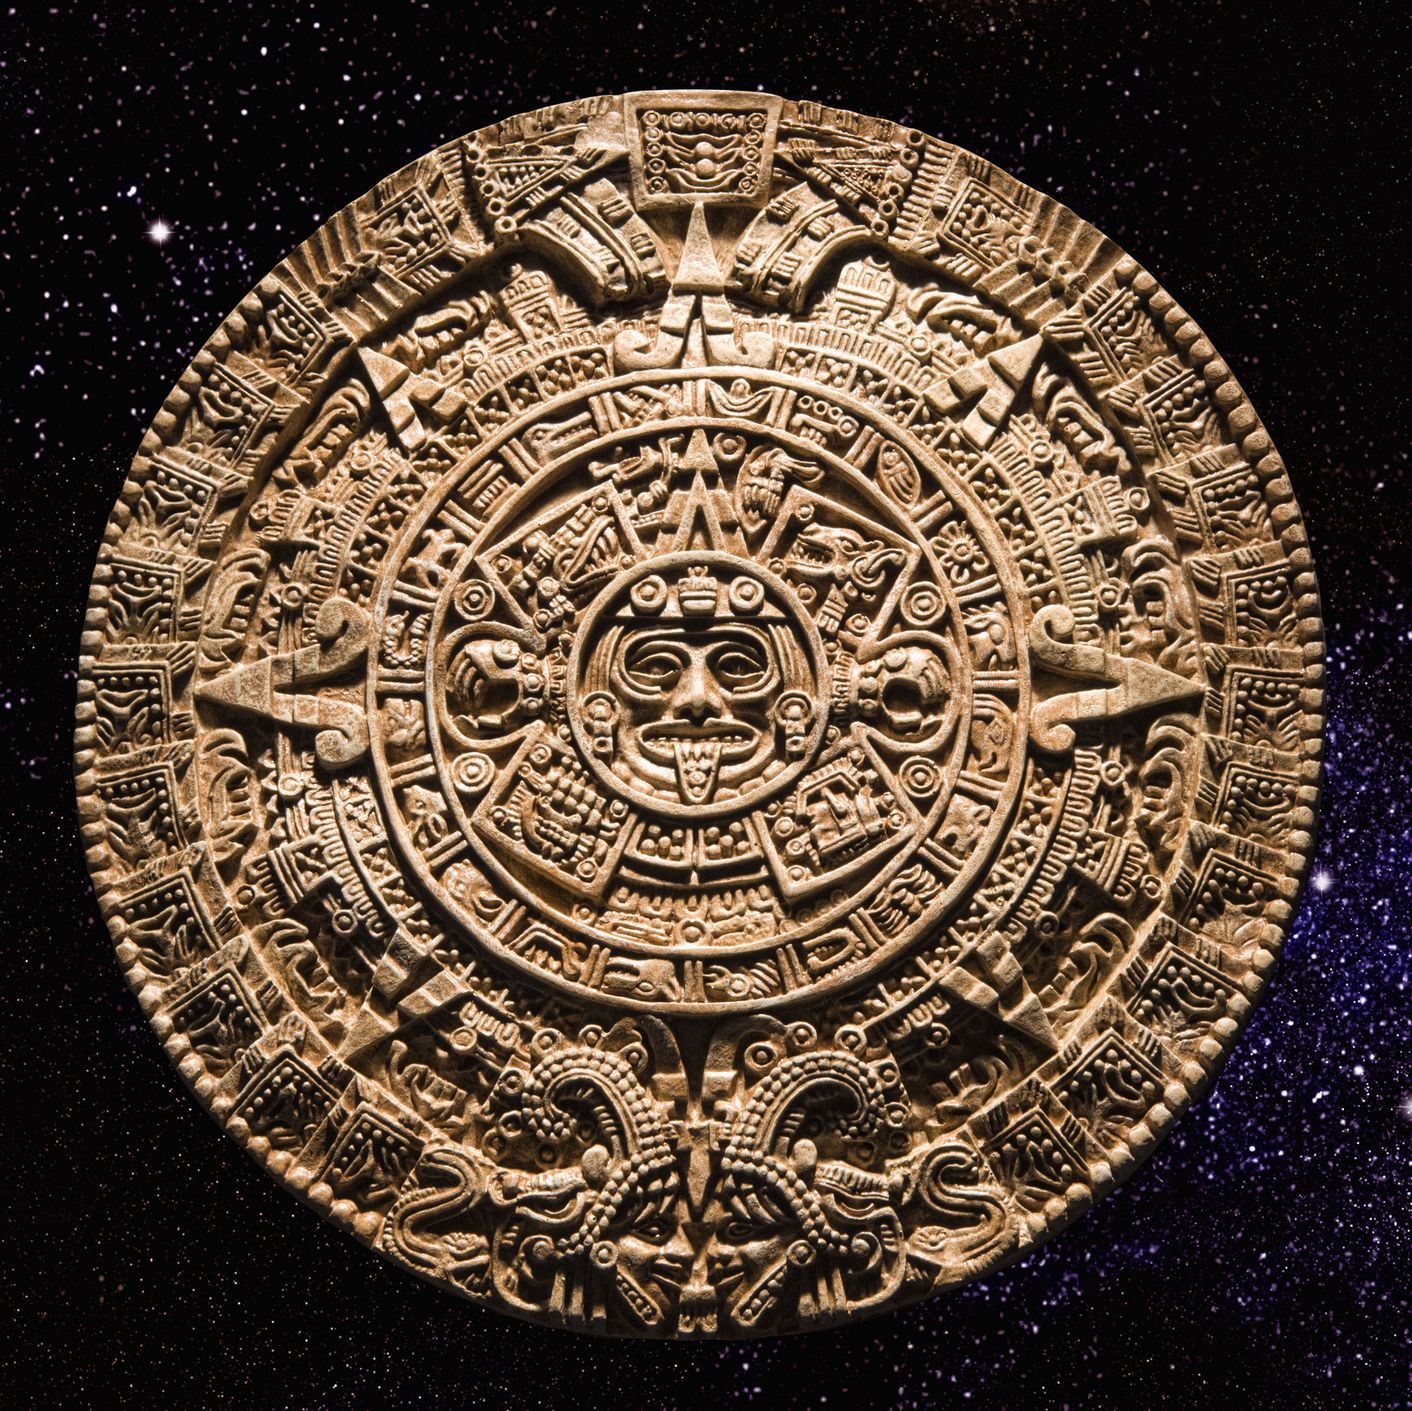 Scientists Finally Solved the Mystery of How the Mayan Calendar Works